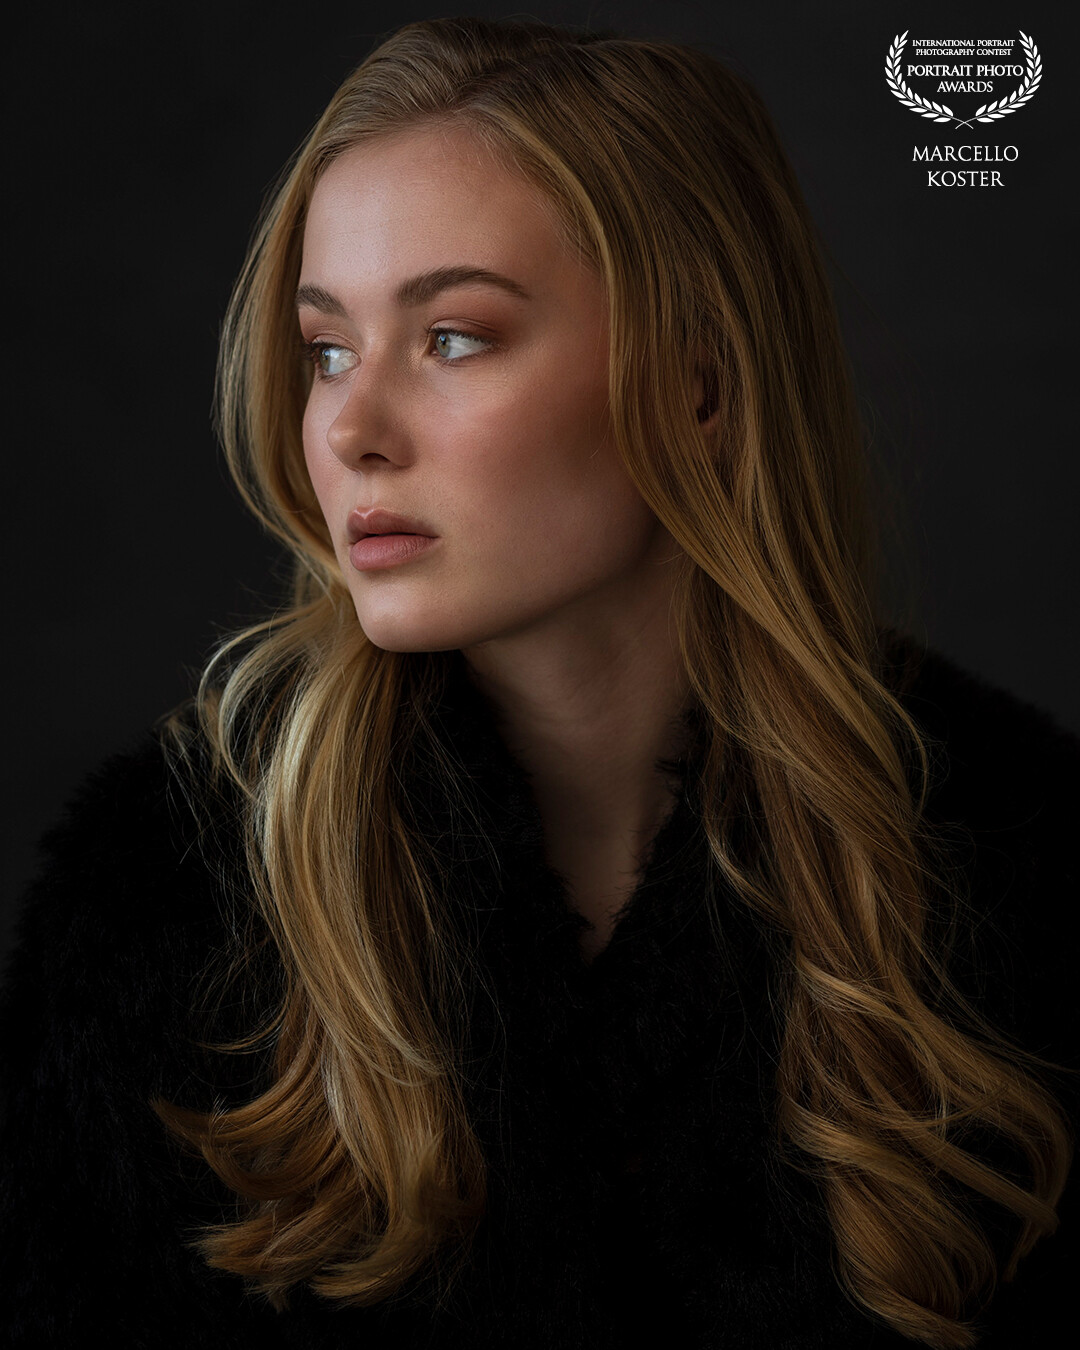 This is Anne!✨<br />
 A young model who can already give a very mature look in front of the camera. <br />
Just look at the photo and judge for yourself... this has truly become a beautiful portrait photo. <br />
Well done, Anne!<br />
We've already won many awards, and this surely won't be the last.💯👍📸